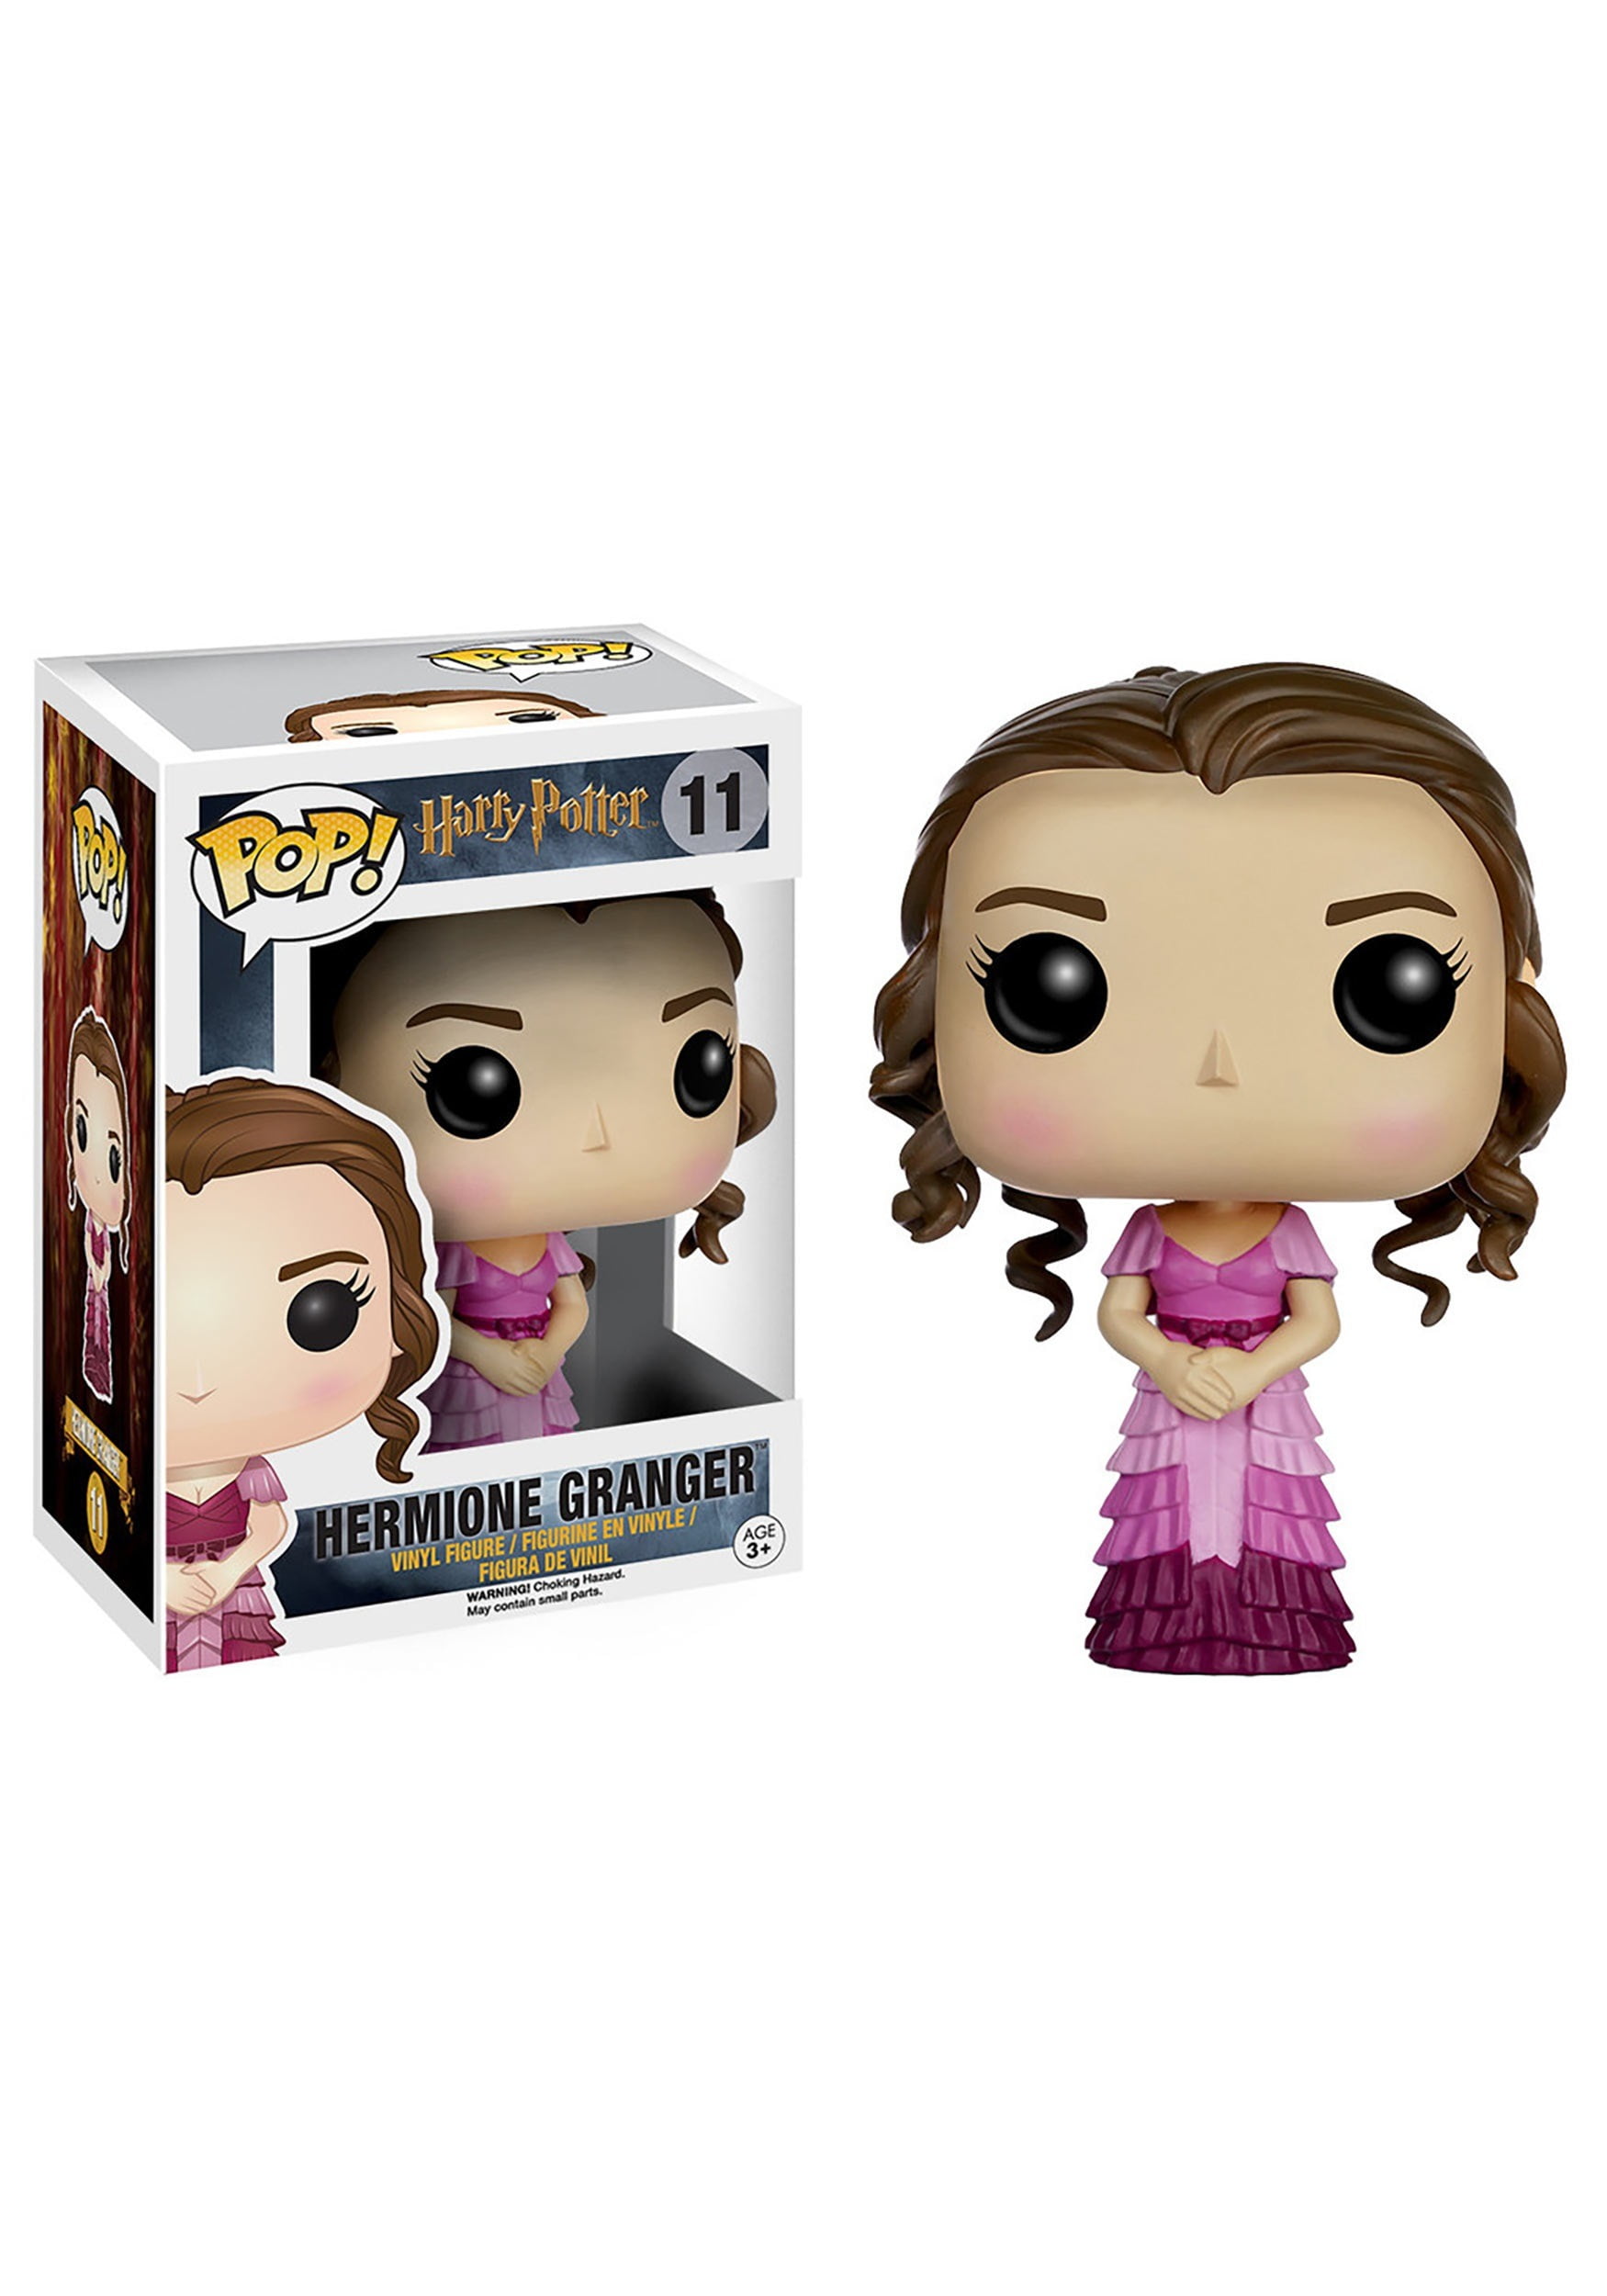 Harry Potter with Prophecy Pop New in stock 